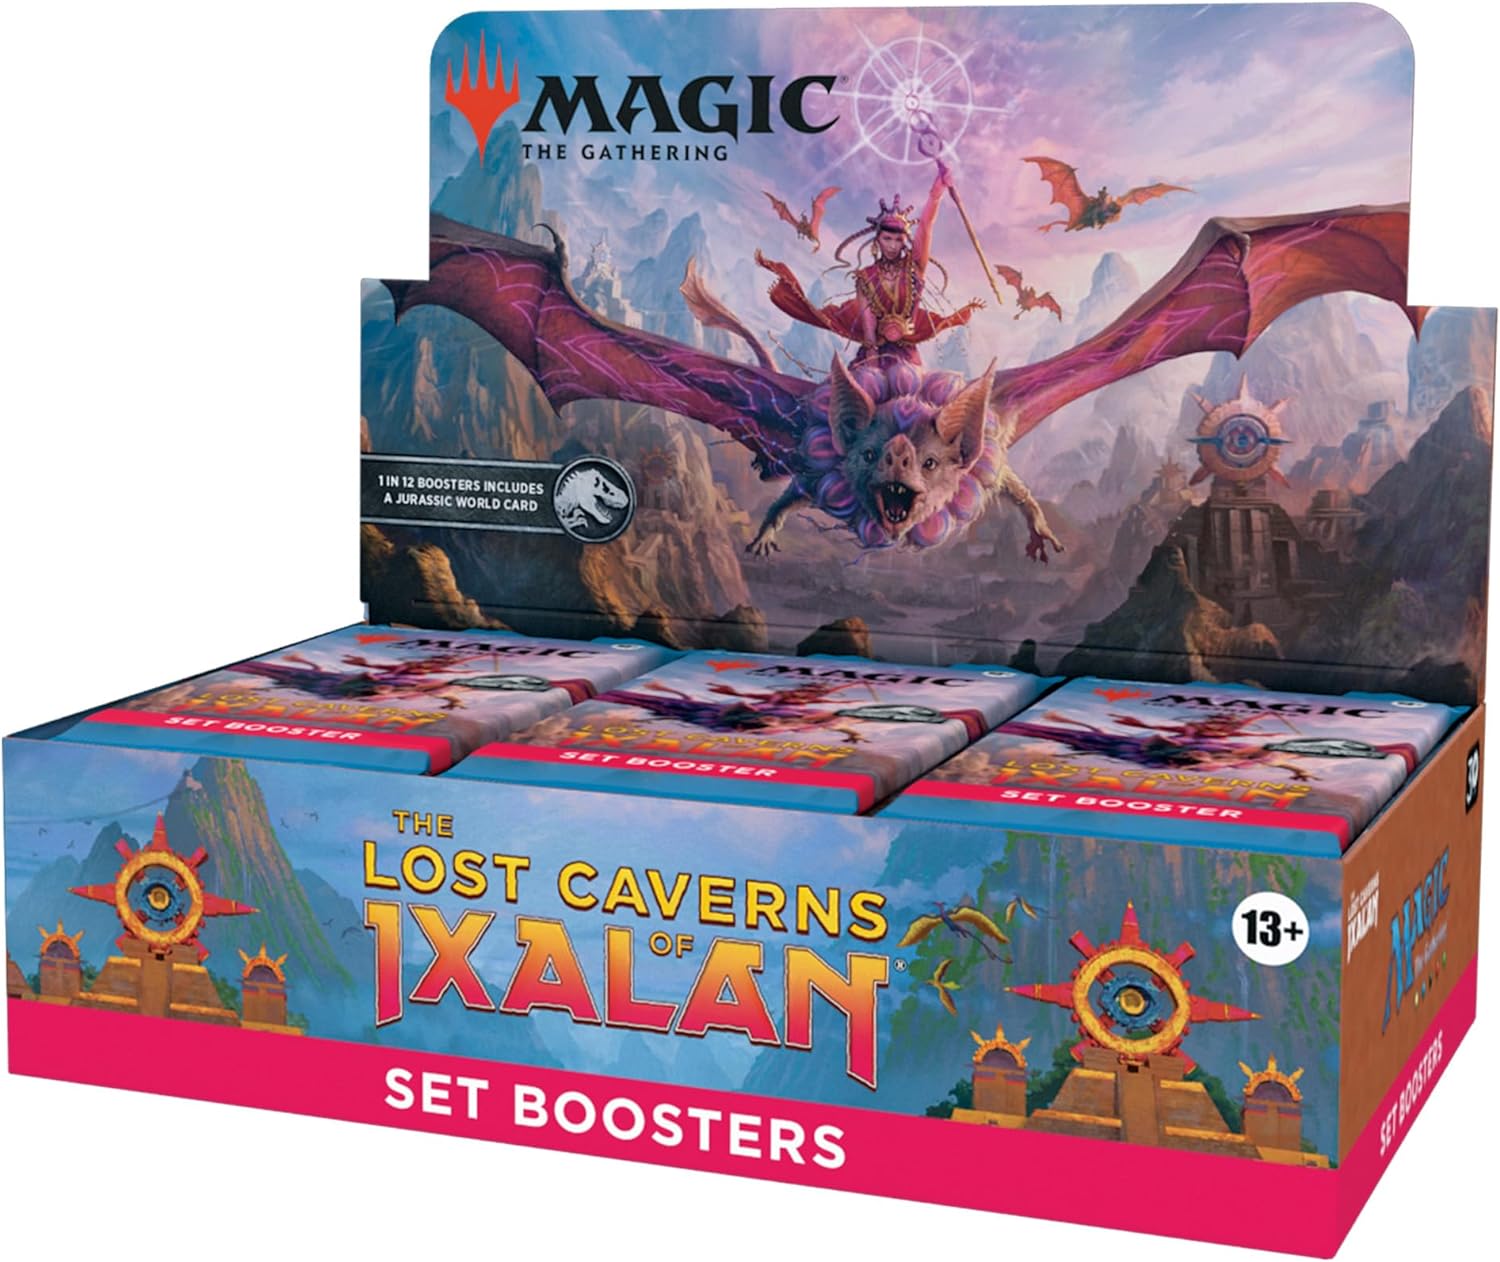 Magic: The Gathering The Lost Caverns of Ixalan Set Booster Box | CCGPrime